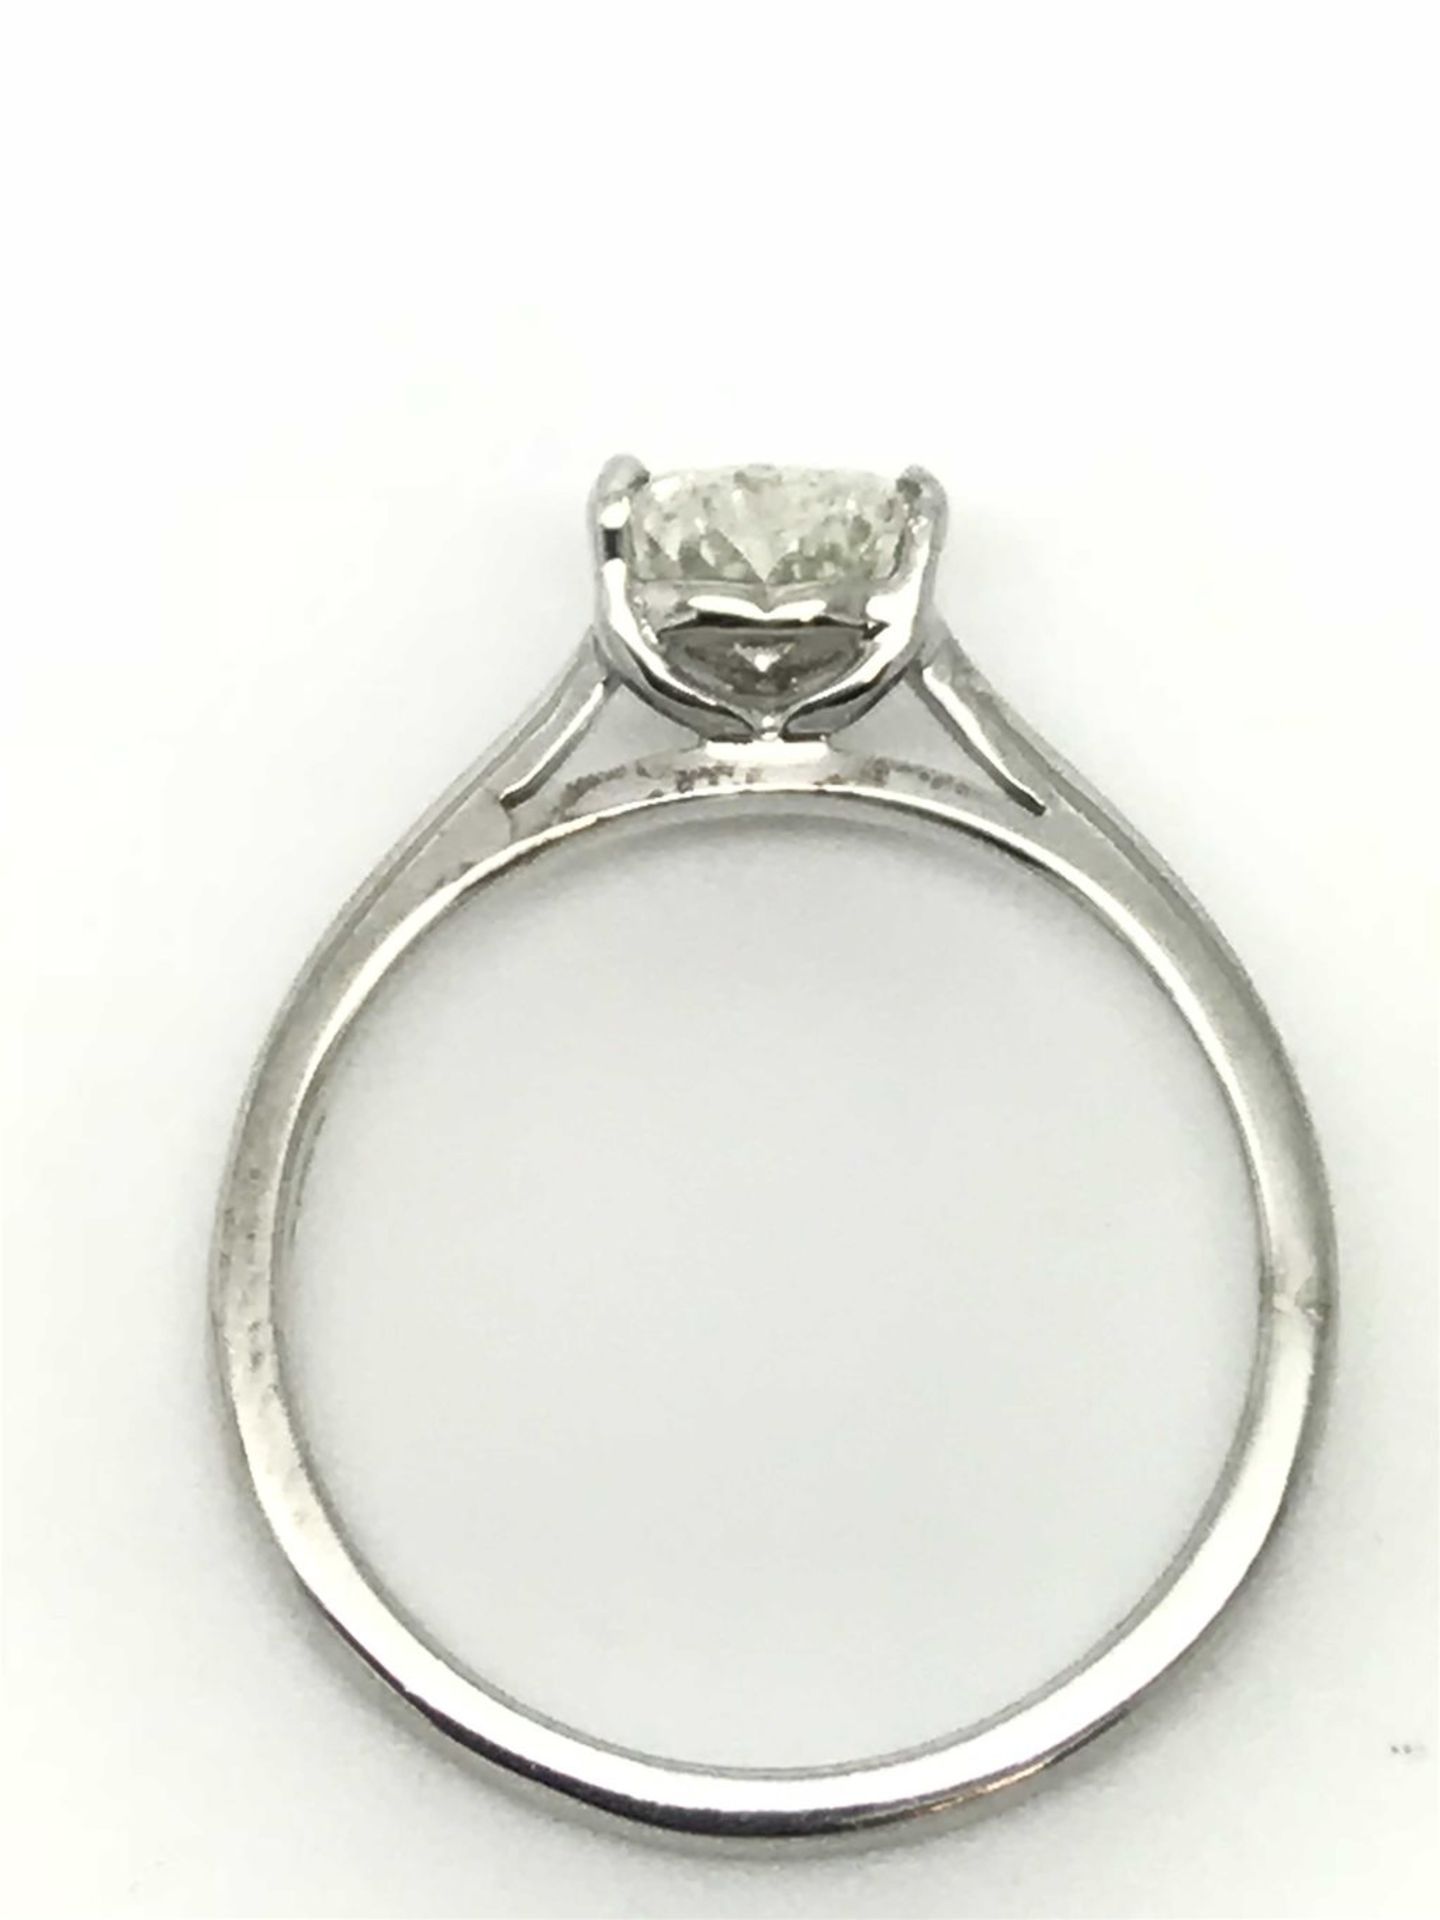 Certificated 0.72ct Heart Shaped Diamond Single Stone Ring - Image 3 of 5